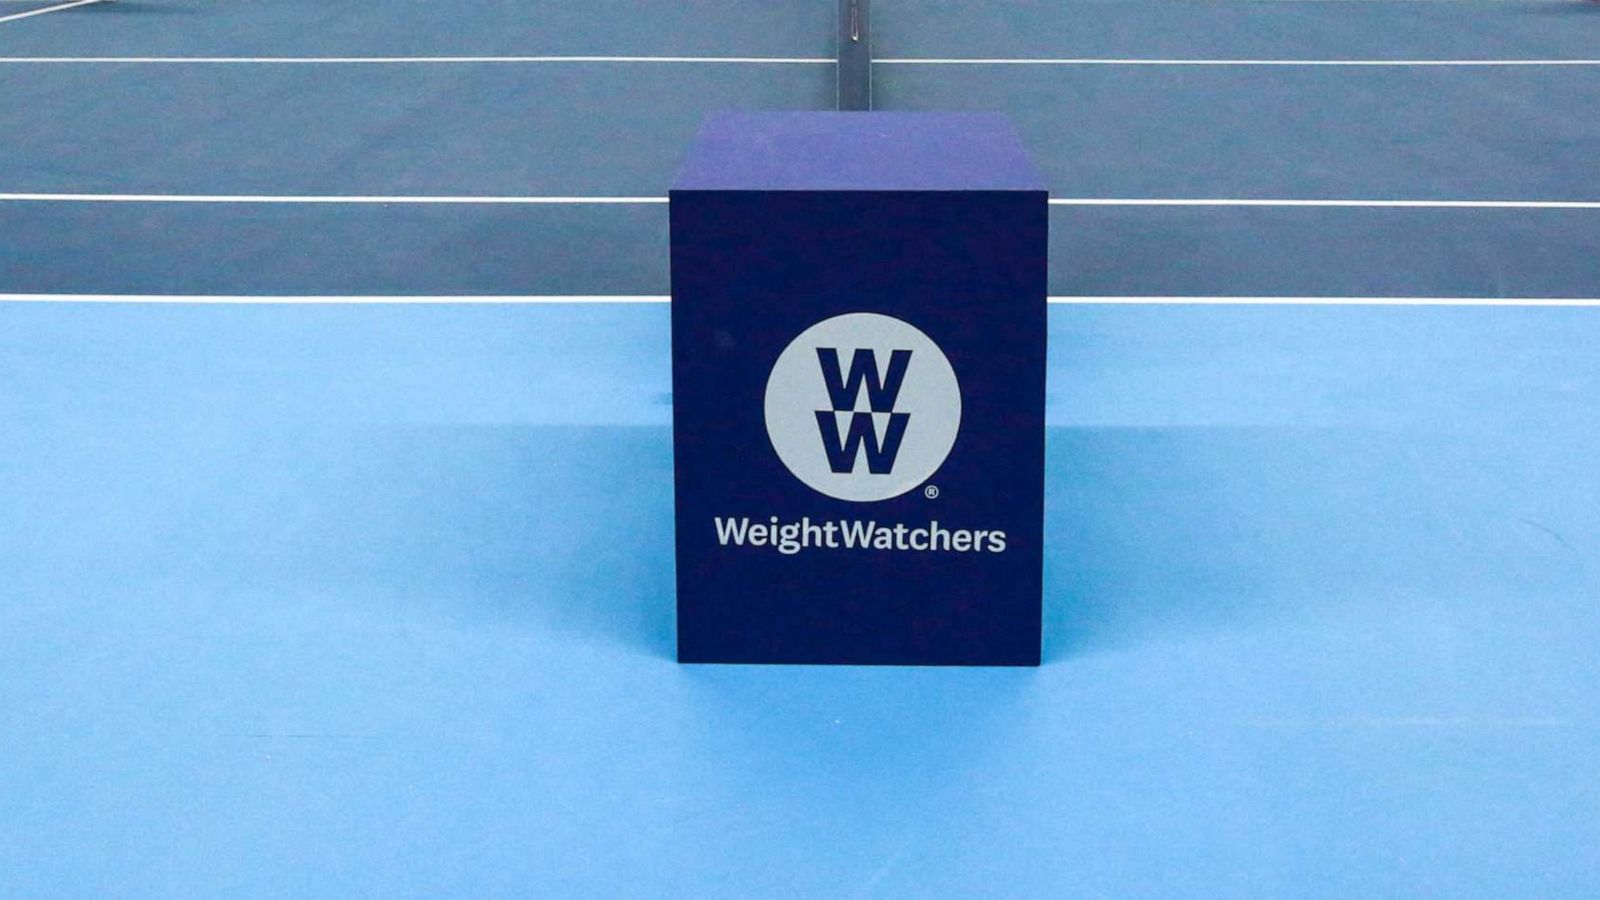 WeightWatchers Moves Into the Ozempic Market With Telehealth Deal - WSJ